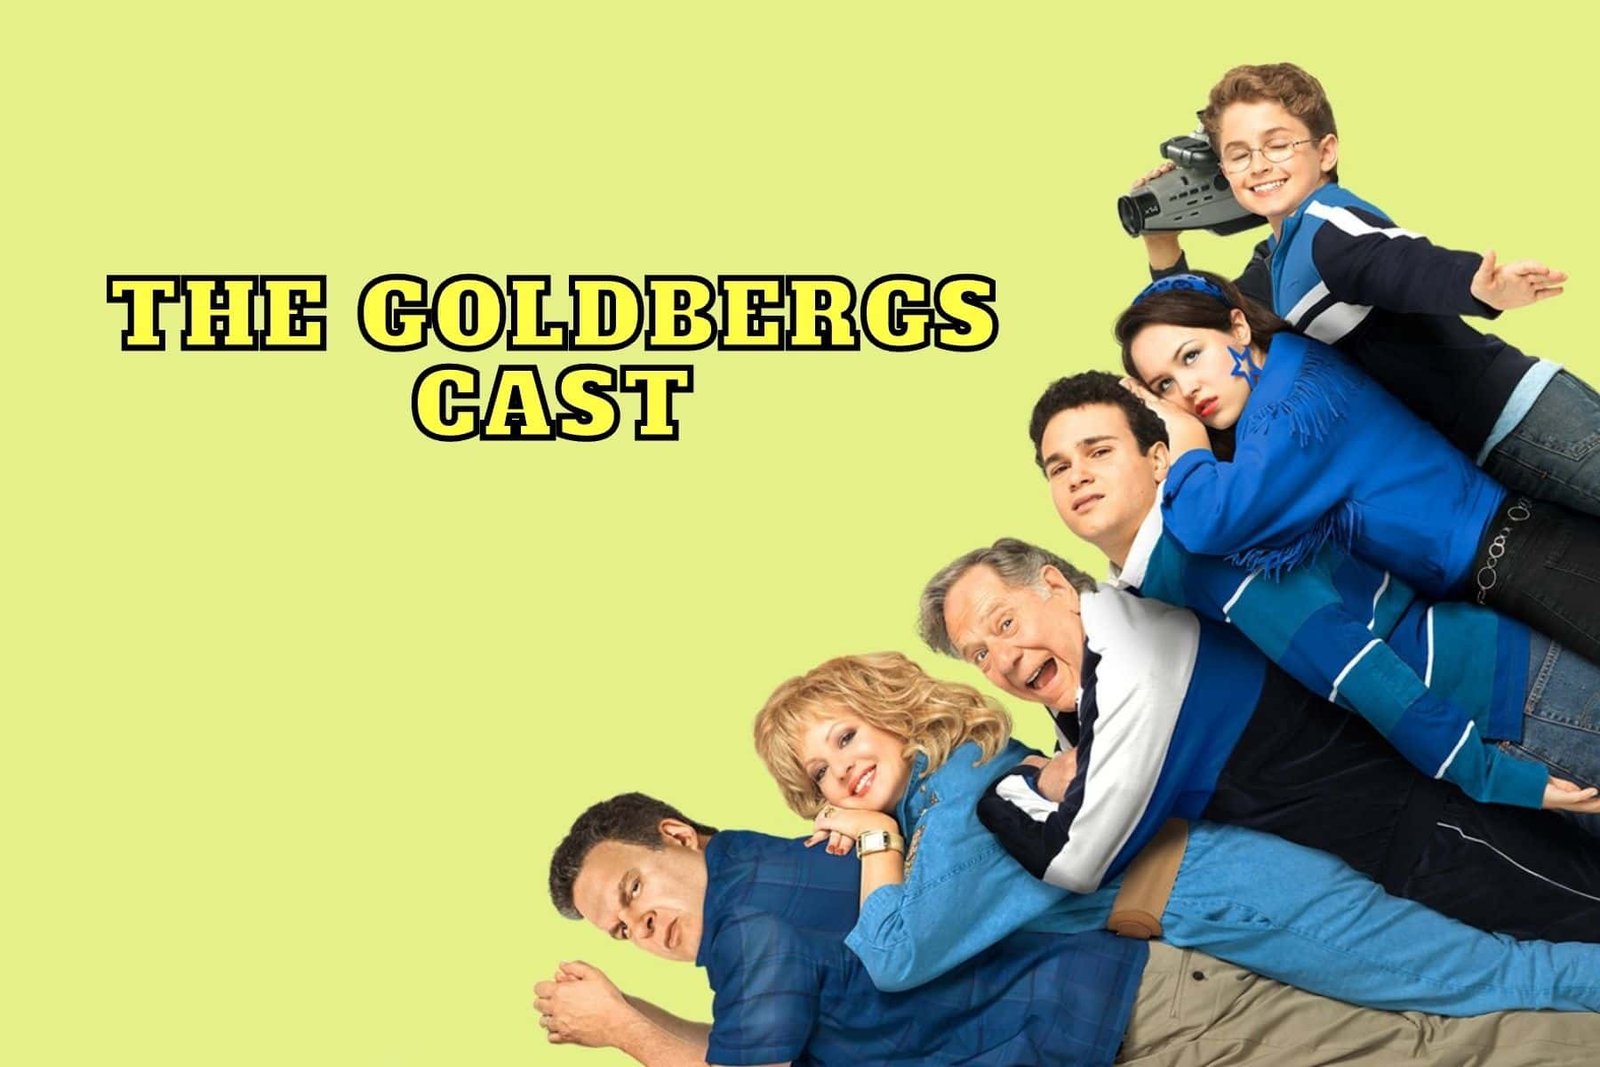 The Goldbergs Cast - Ages, Partners, Characters